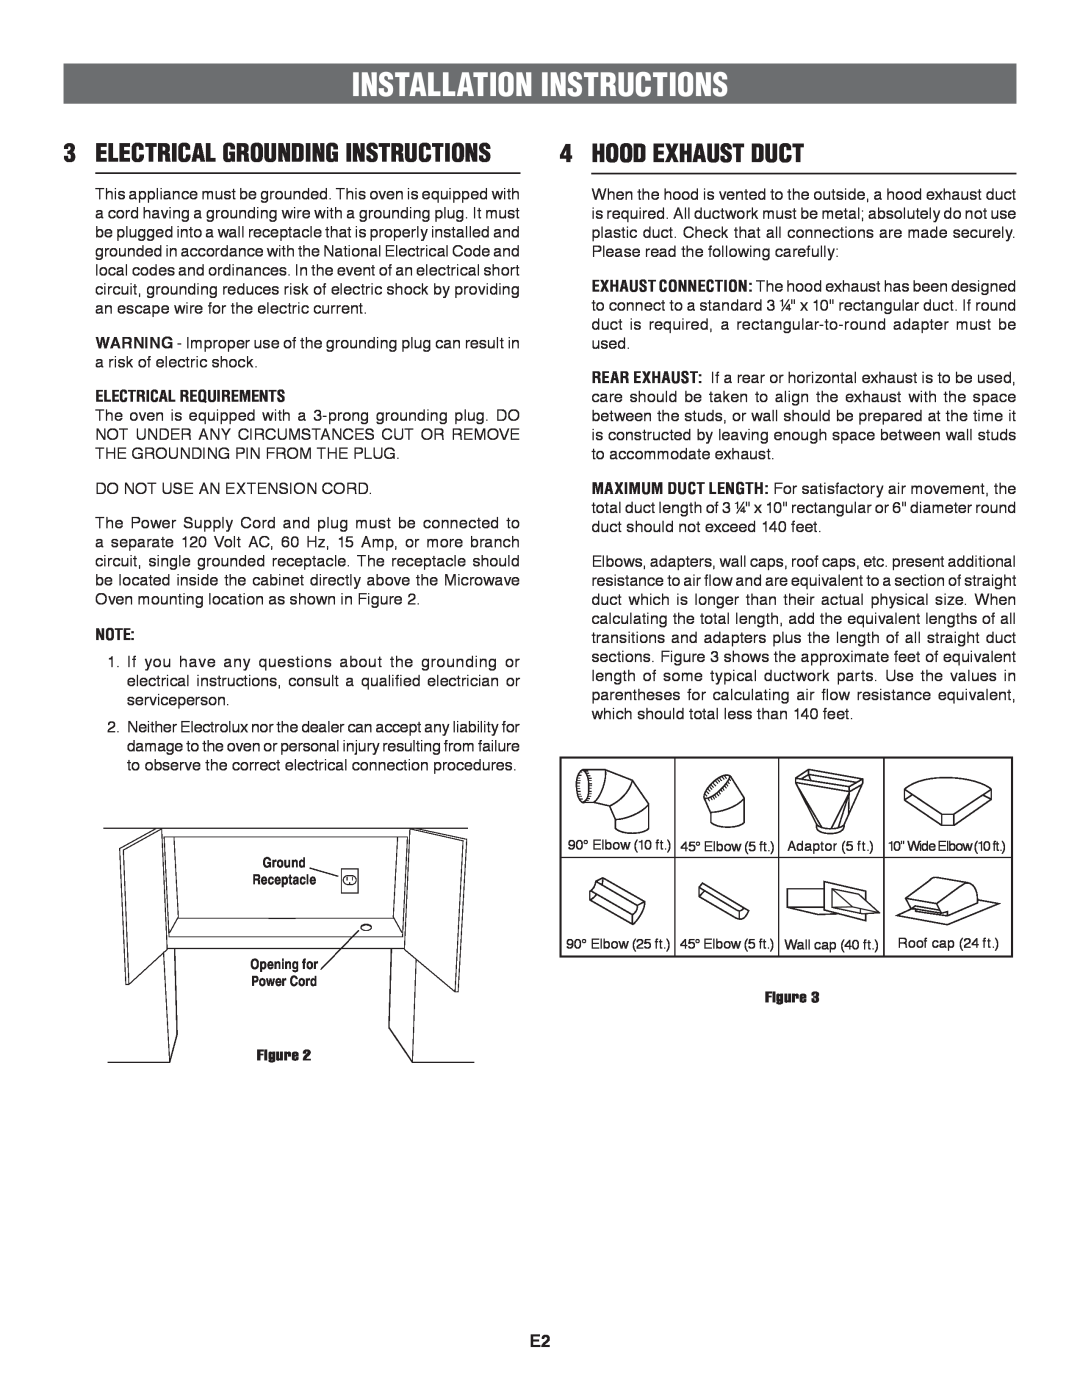 Frigidaire TINSEB151WRRZ, 316137234 Installation Instructions, Hood Exhaust Duct, Electrical Grounding Instructions 